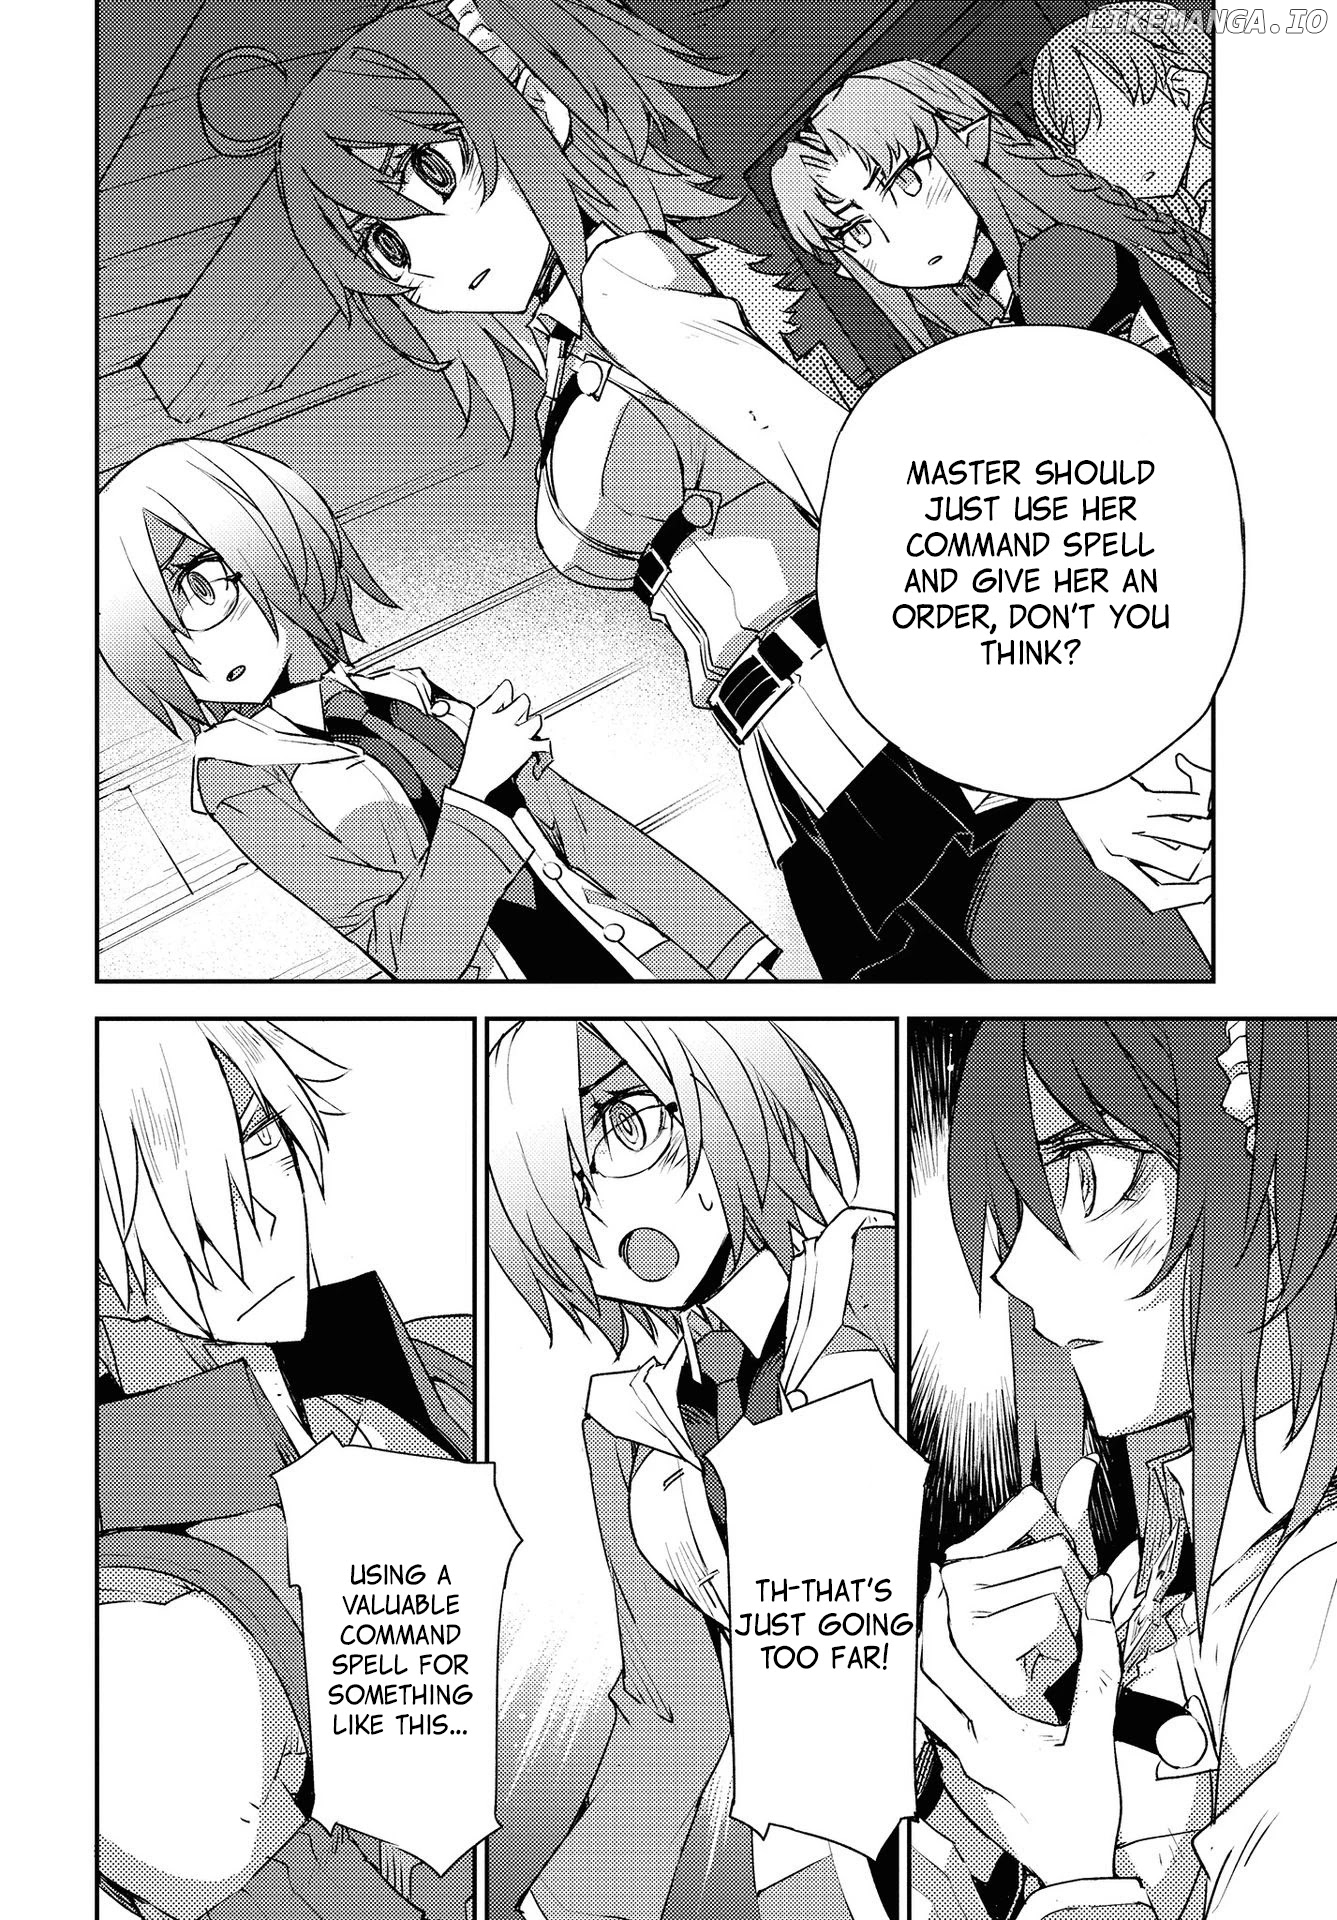 Fate/Grand Order: Epic of Remnant - Subspecies Singularity IV: Taboo Advent Salem: Salem of Heresy chapter 11 - page 6